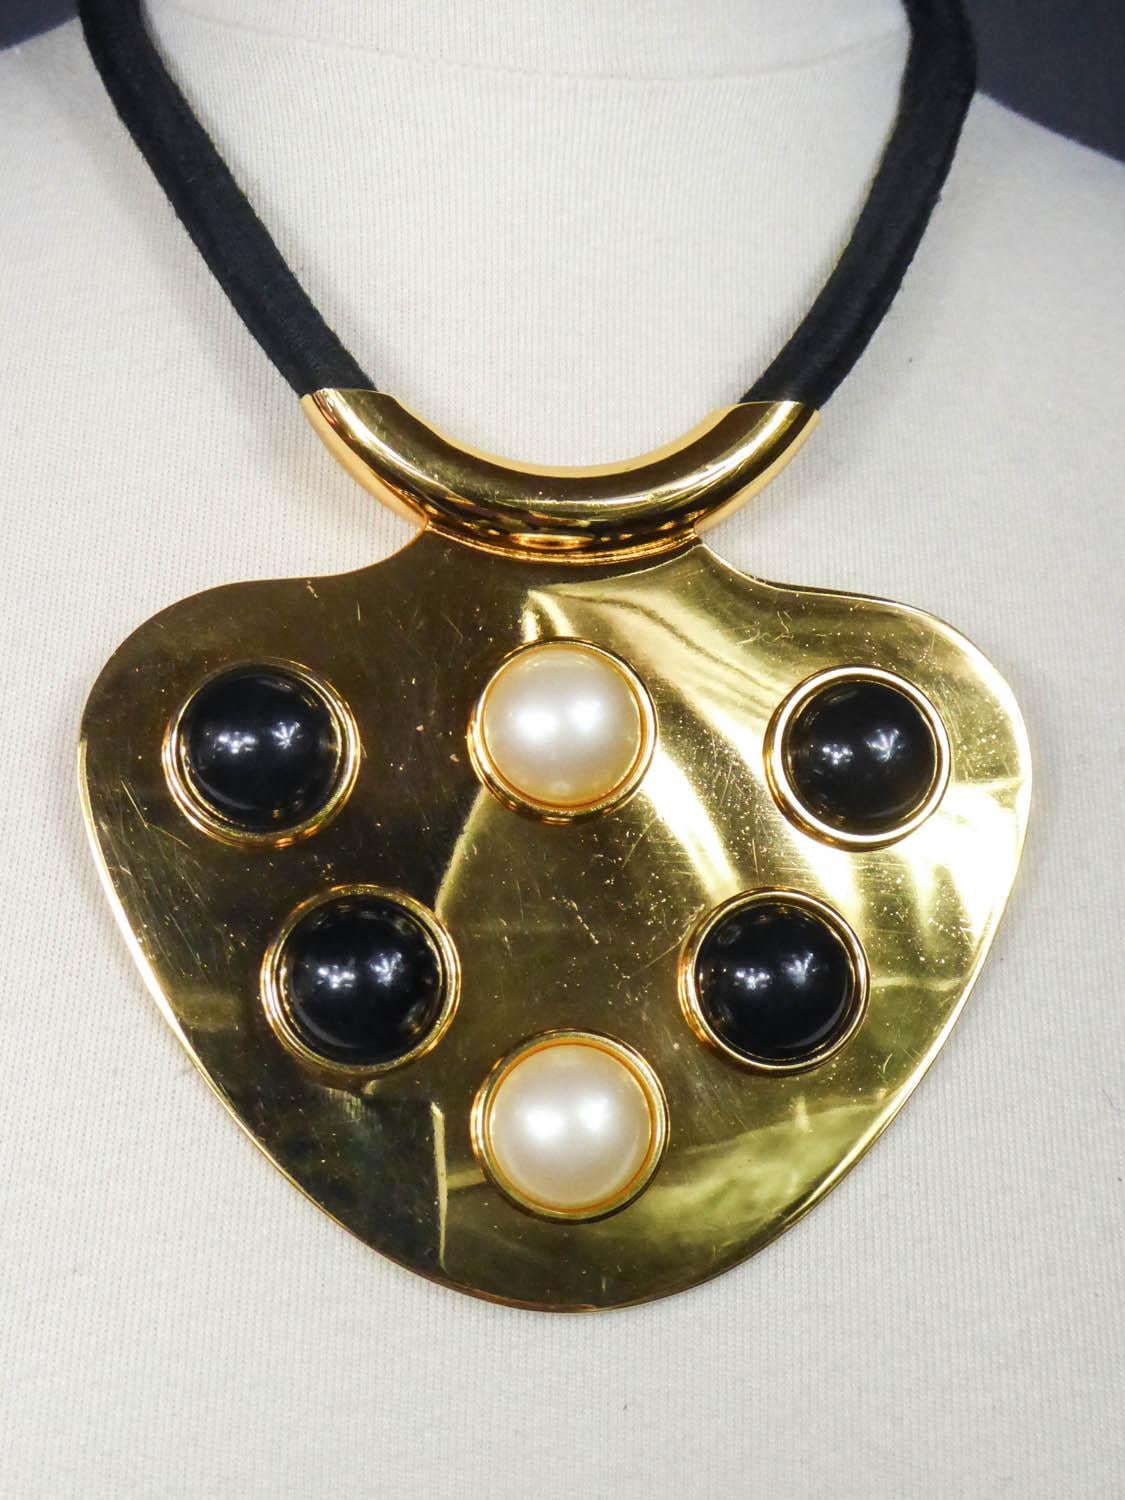 Circa 1970
Paris France

Imposing and iconic pendant necklace by Lanvin from the early 1970s of the Space Age period. Large crew-neck medallion in shiny golden brass in the shape of drop. Cabochons of large half beads in black and pearly bakelite,